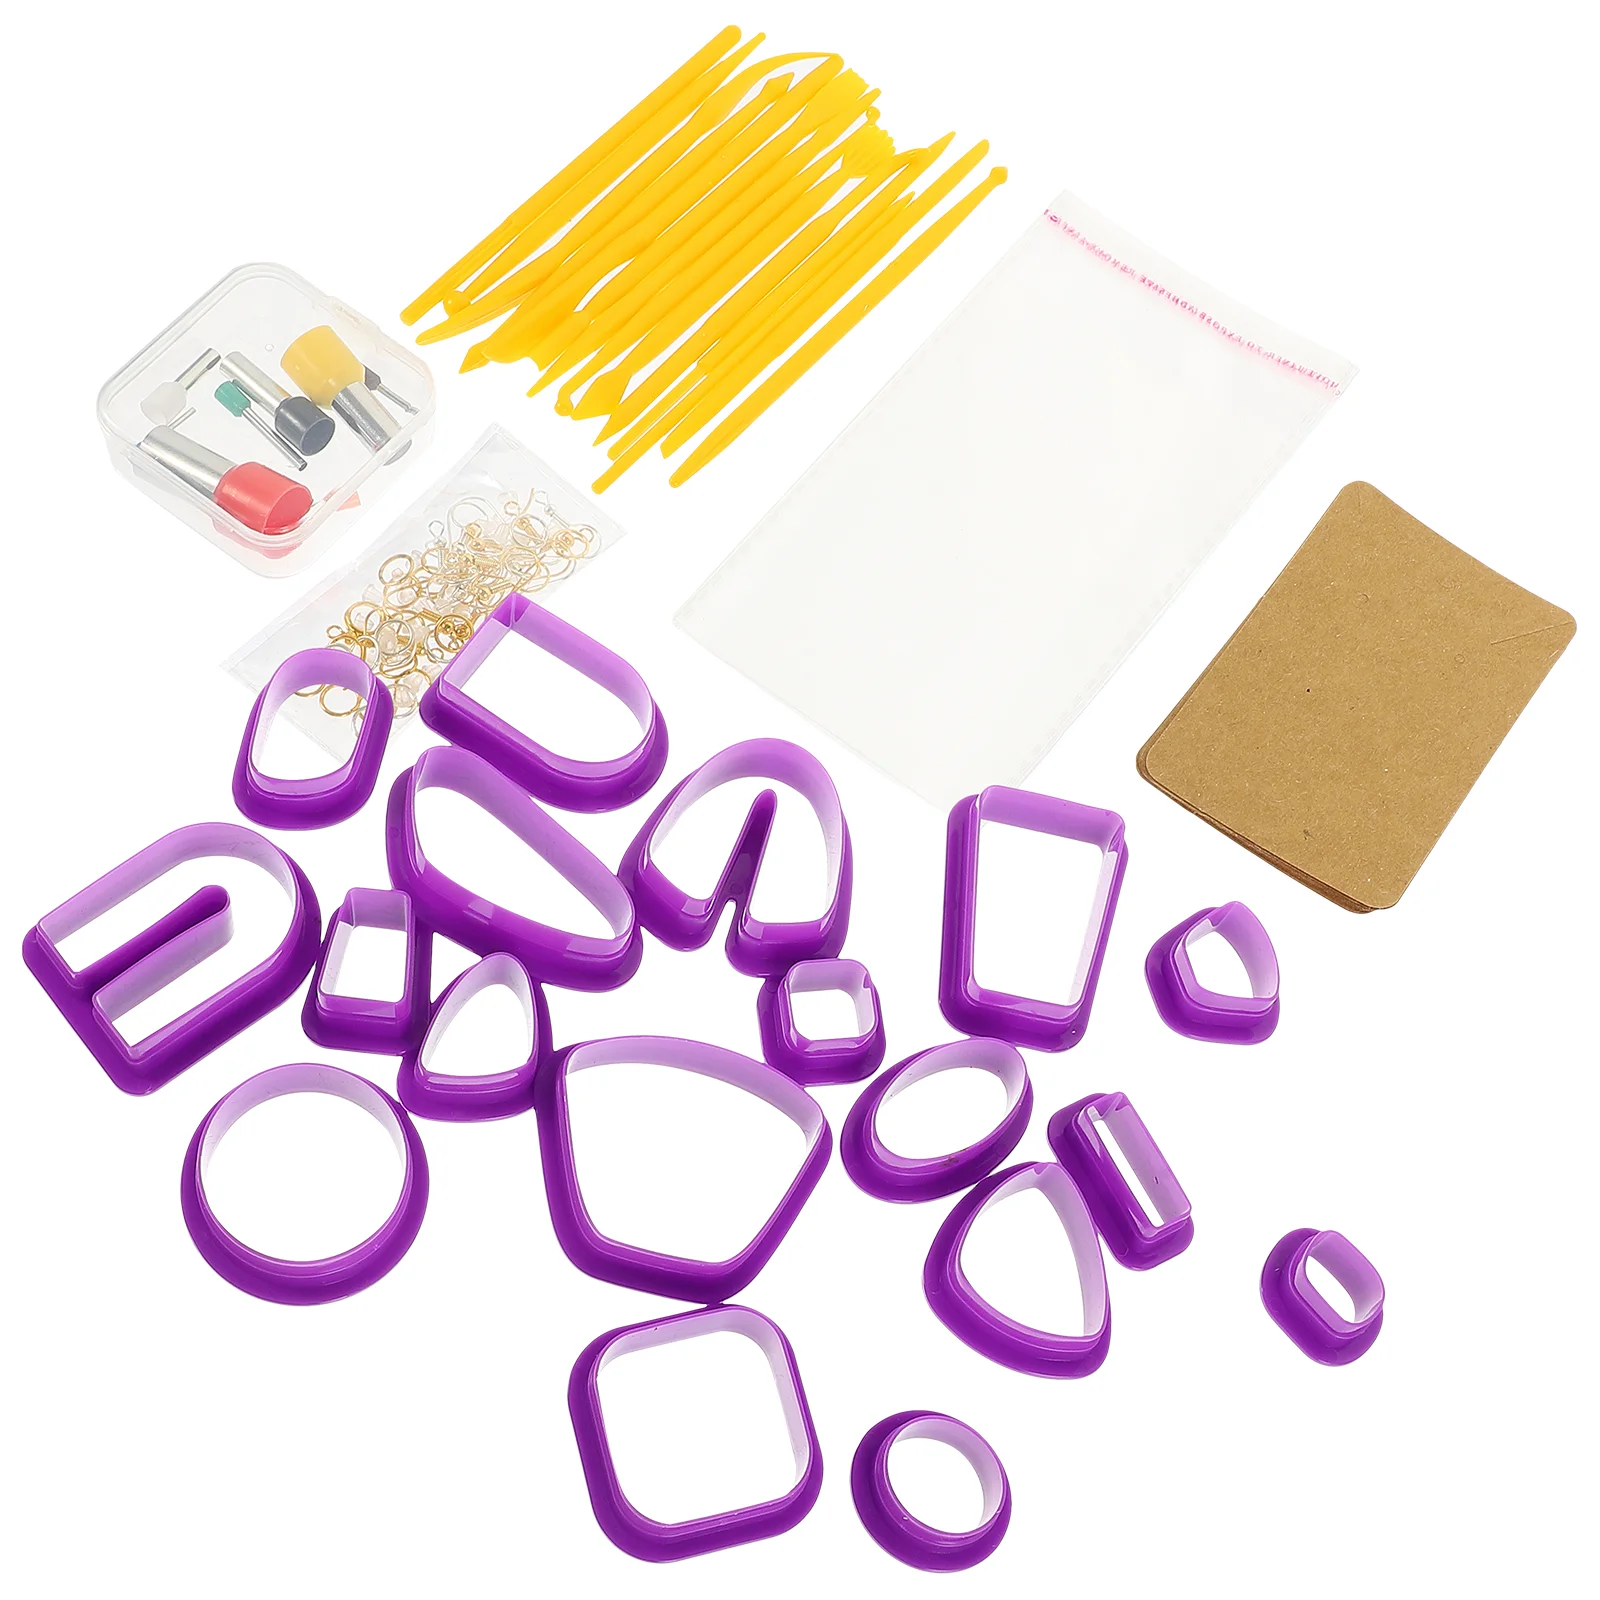 Practical Multi-functional Lasting Portable Clay Earring Making Set Pottery Craft Tool for DIY Handcrafting